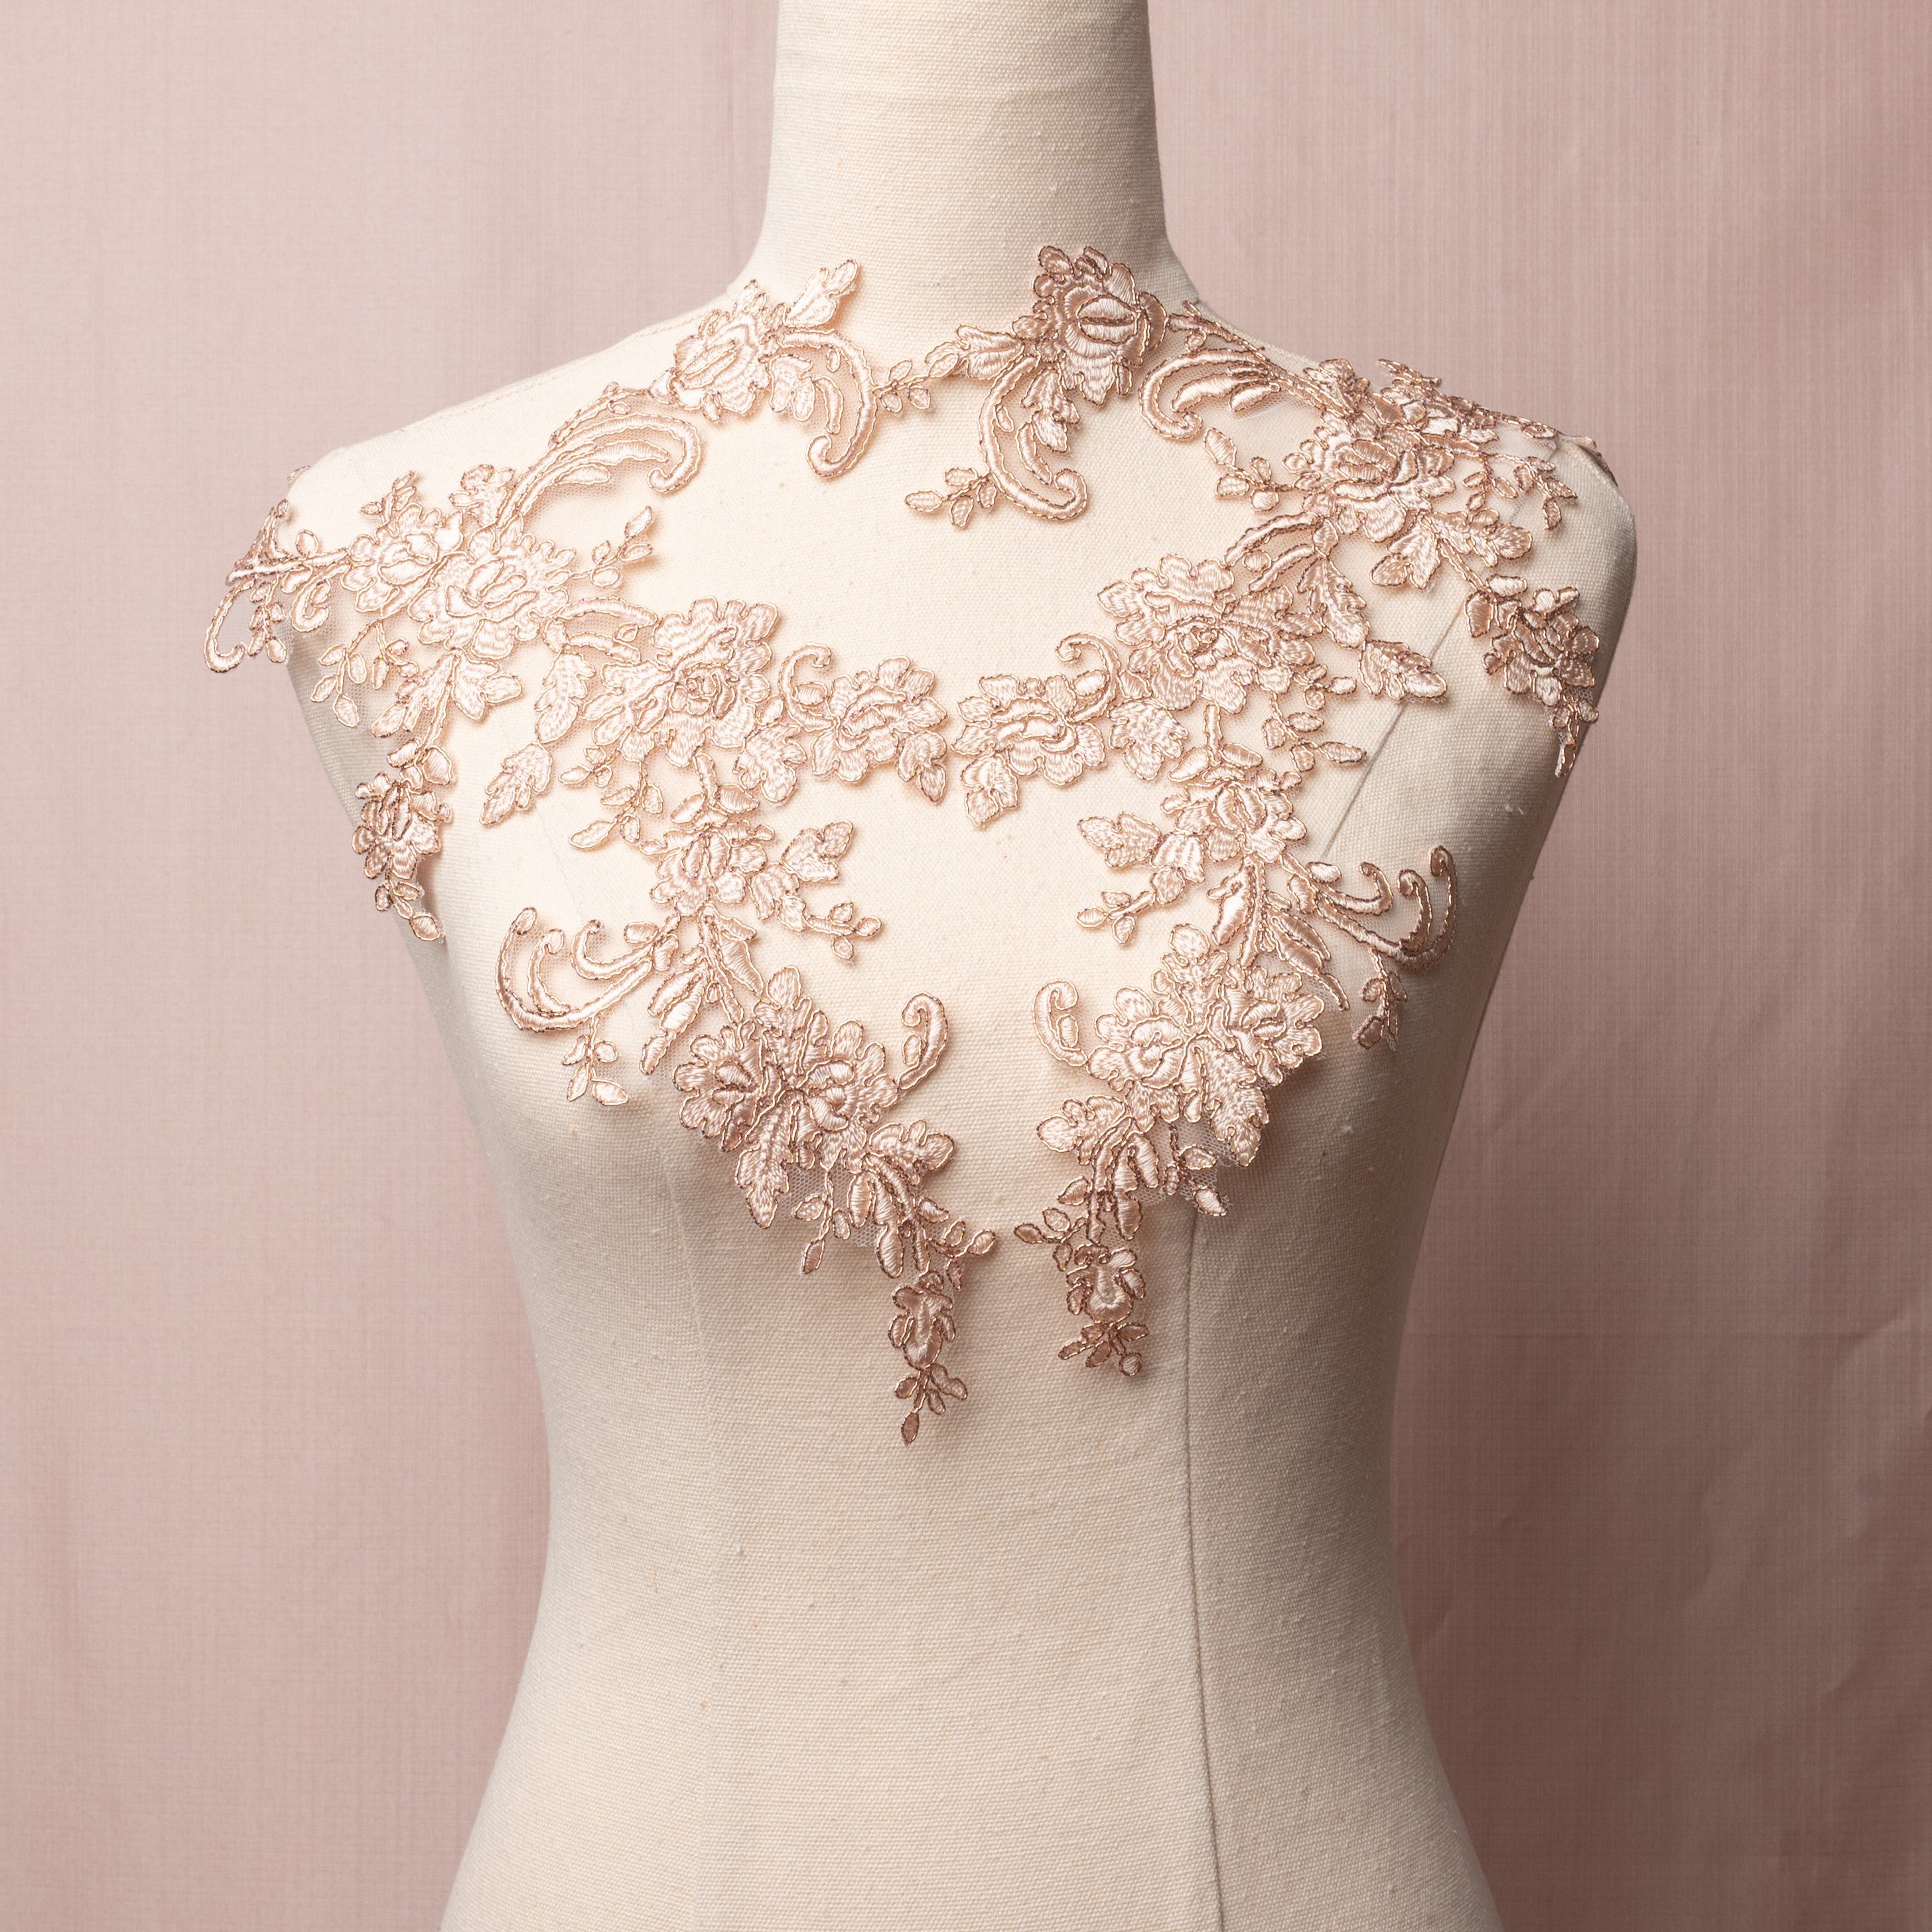 Heavily embroidered rose gold applique with a floral pattern edged with metallic rose gold cording.  The appliques are displayed on a mannequin.